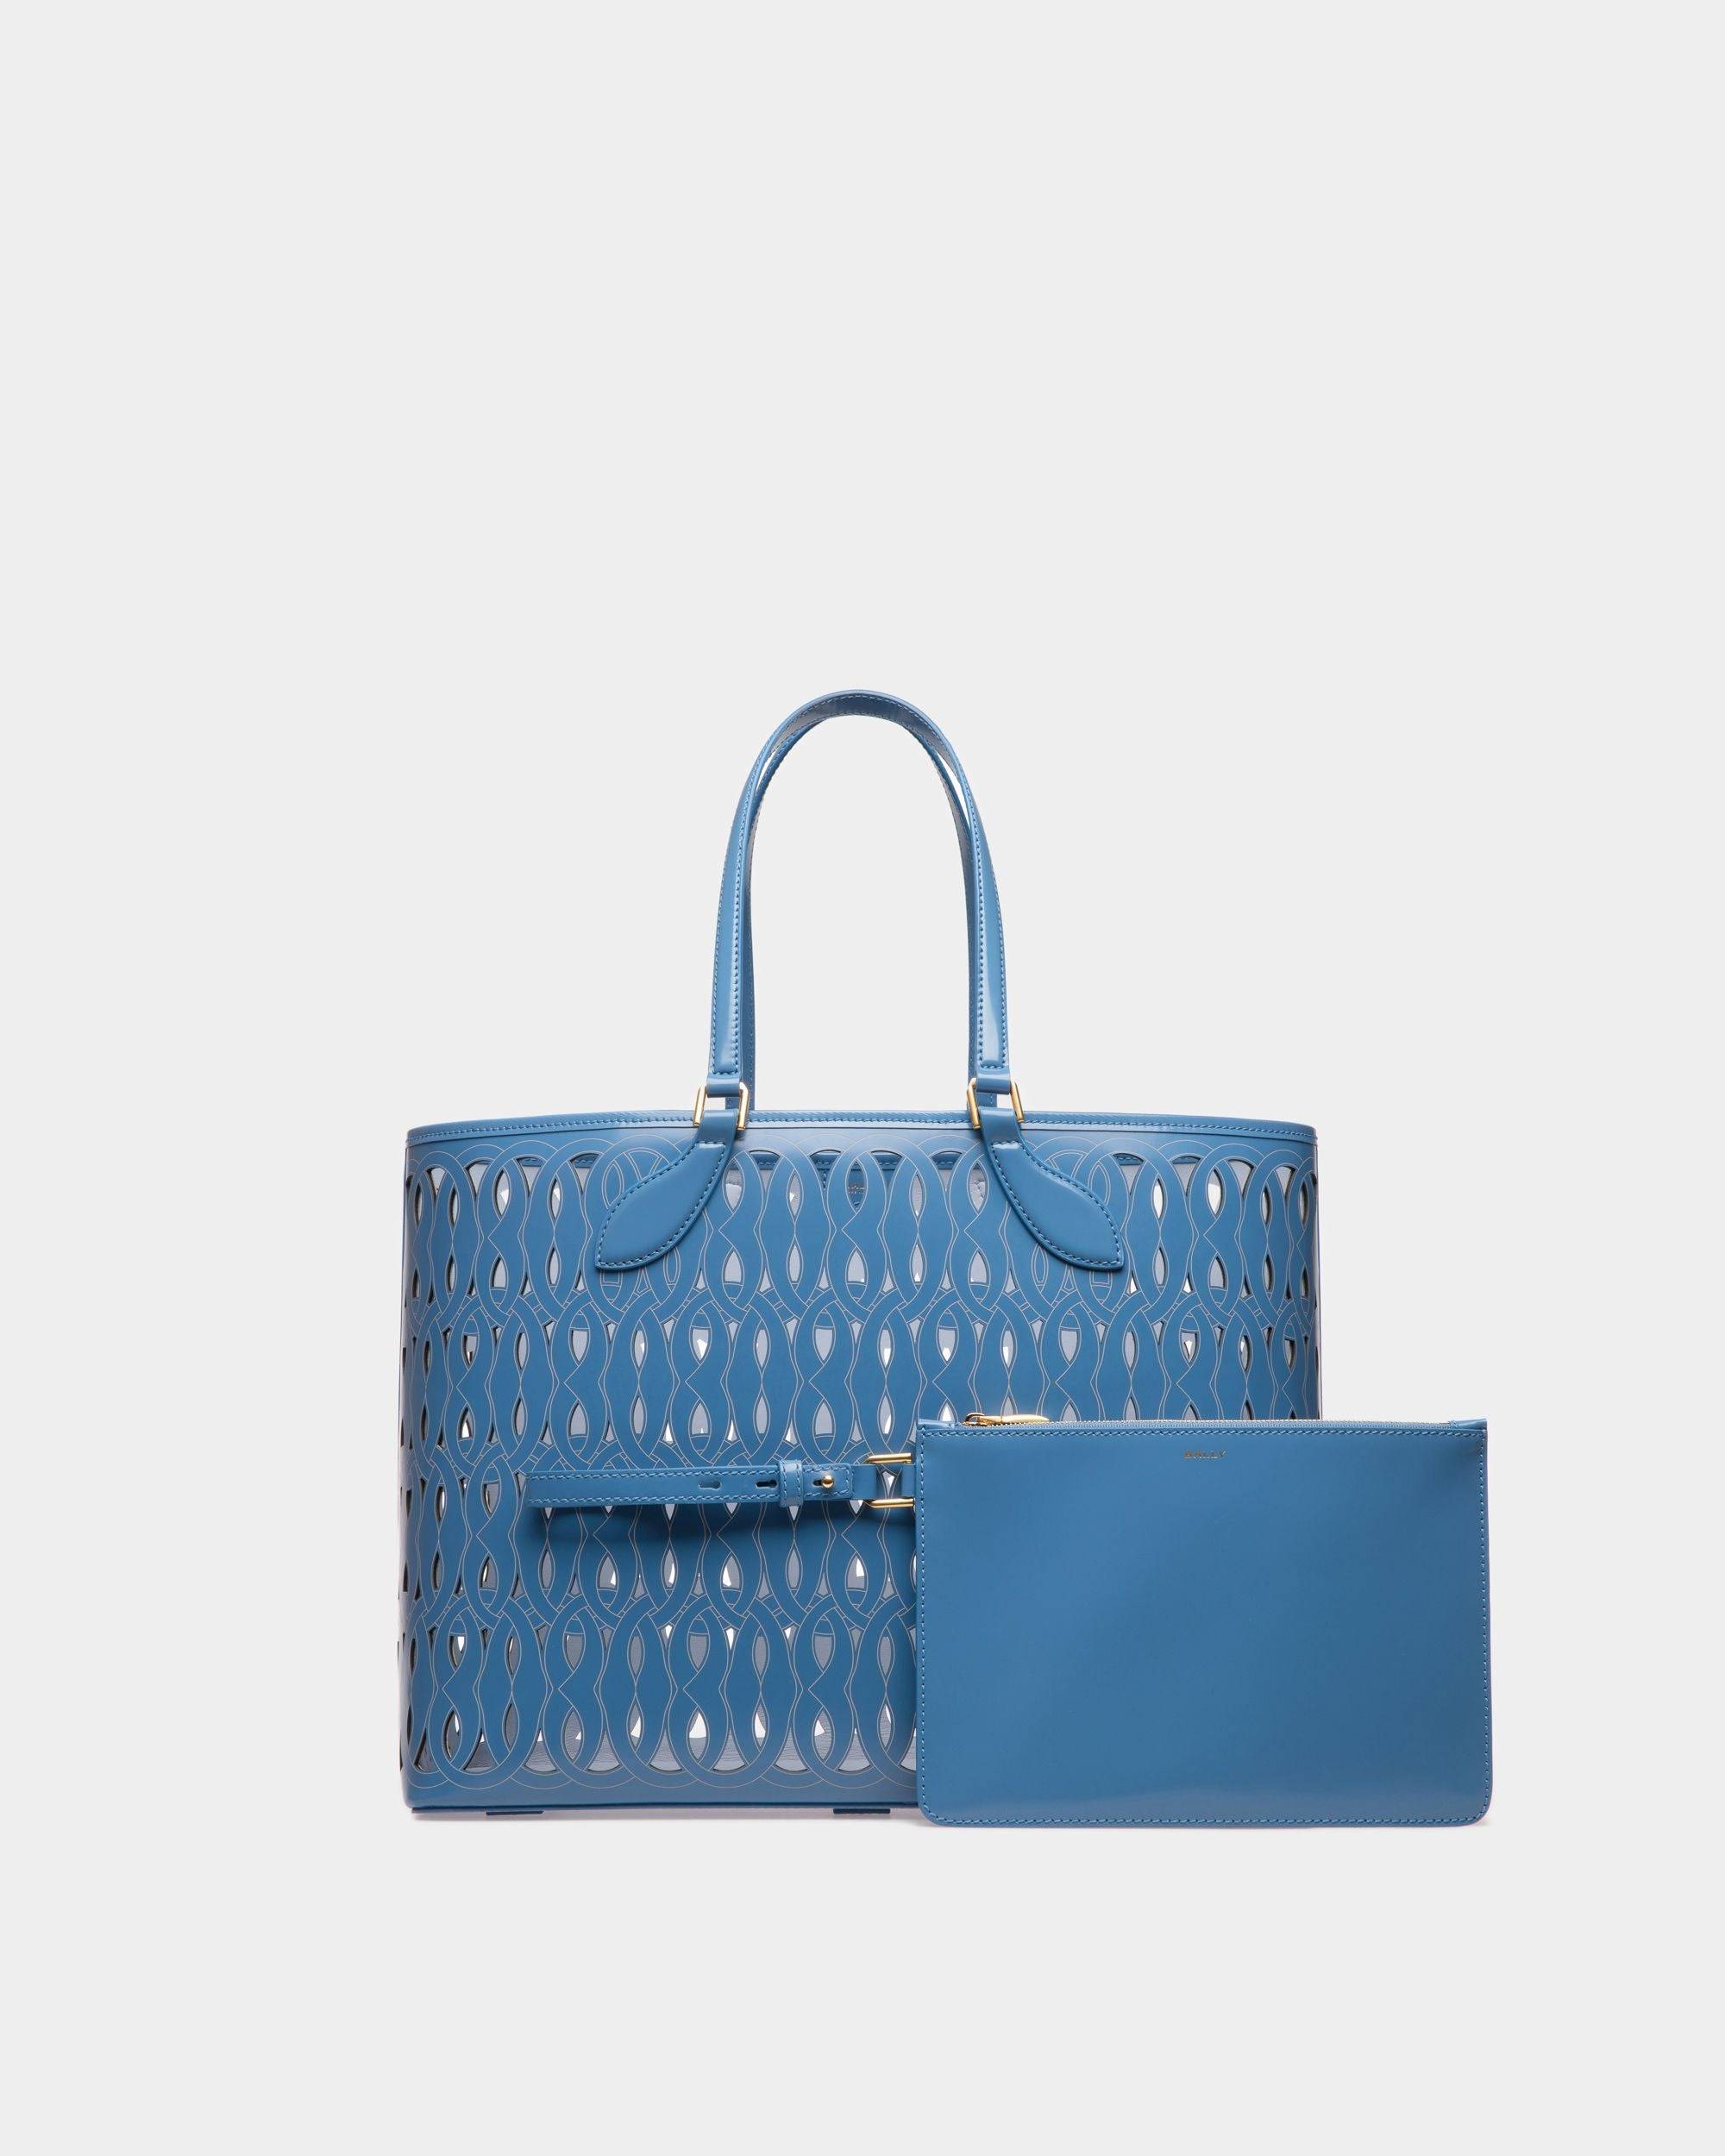 Women's Lago Tote Bag In Blue Leather | Bally | Still Life Front